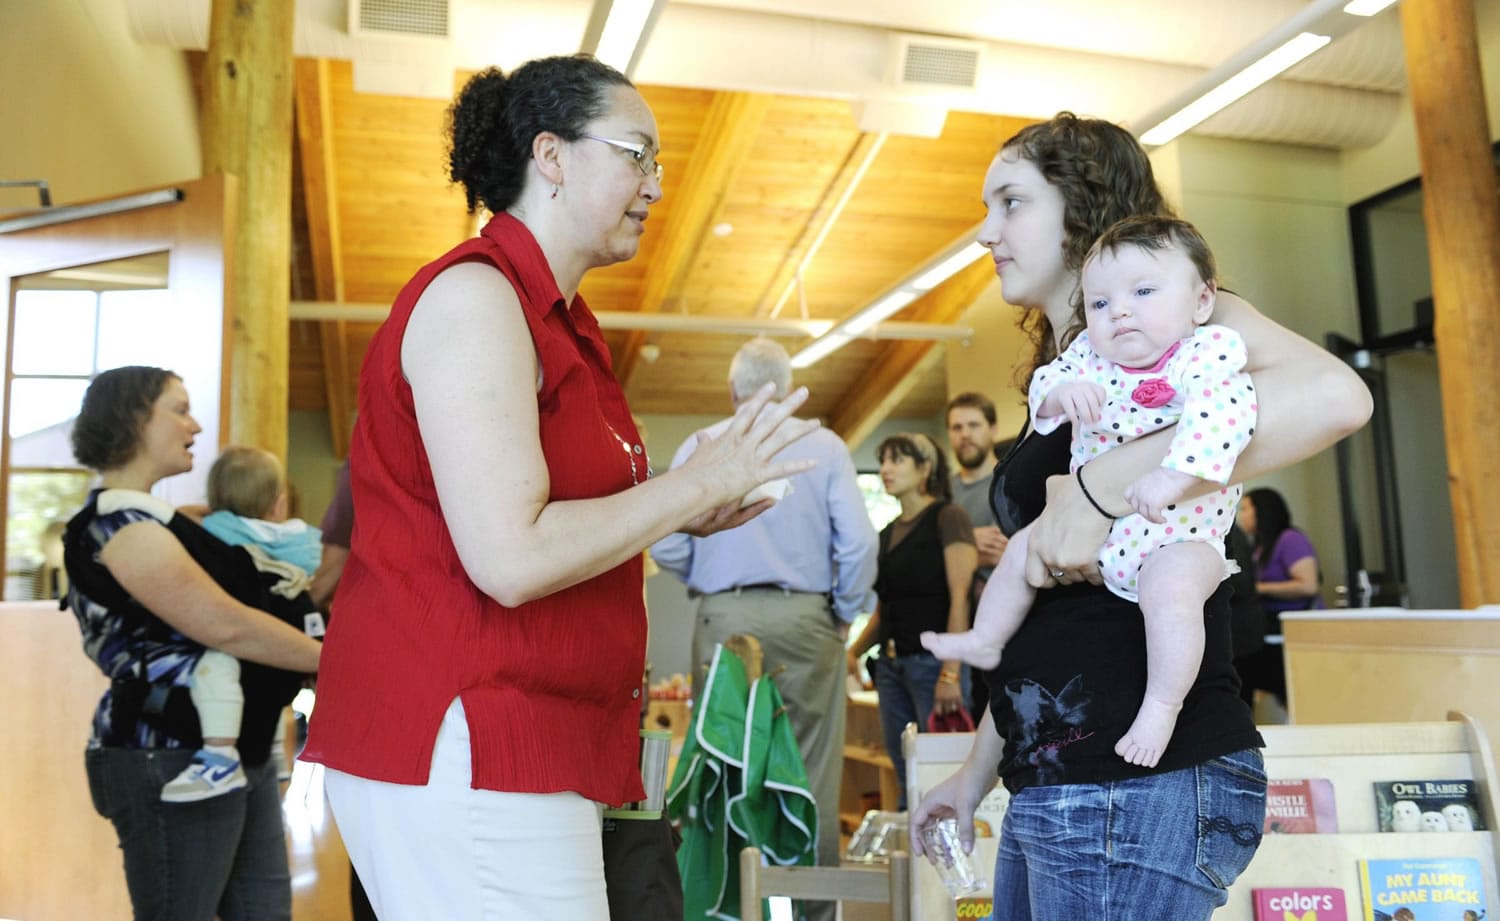 Desiree de Monye, left, talks with her daughter Emily de Monye -- who holds her own 3-month-old daughter, Charlotte de Monye -- as they tour the Oliva Family Early Learning Center after Thursday's dedication at Clark College.